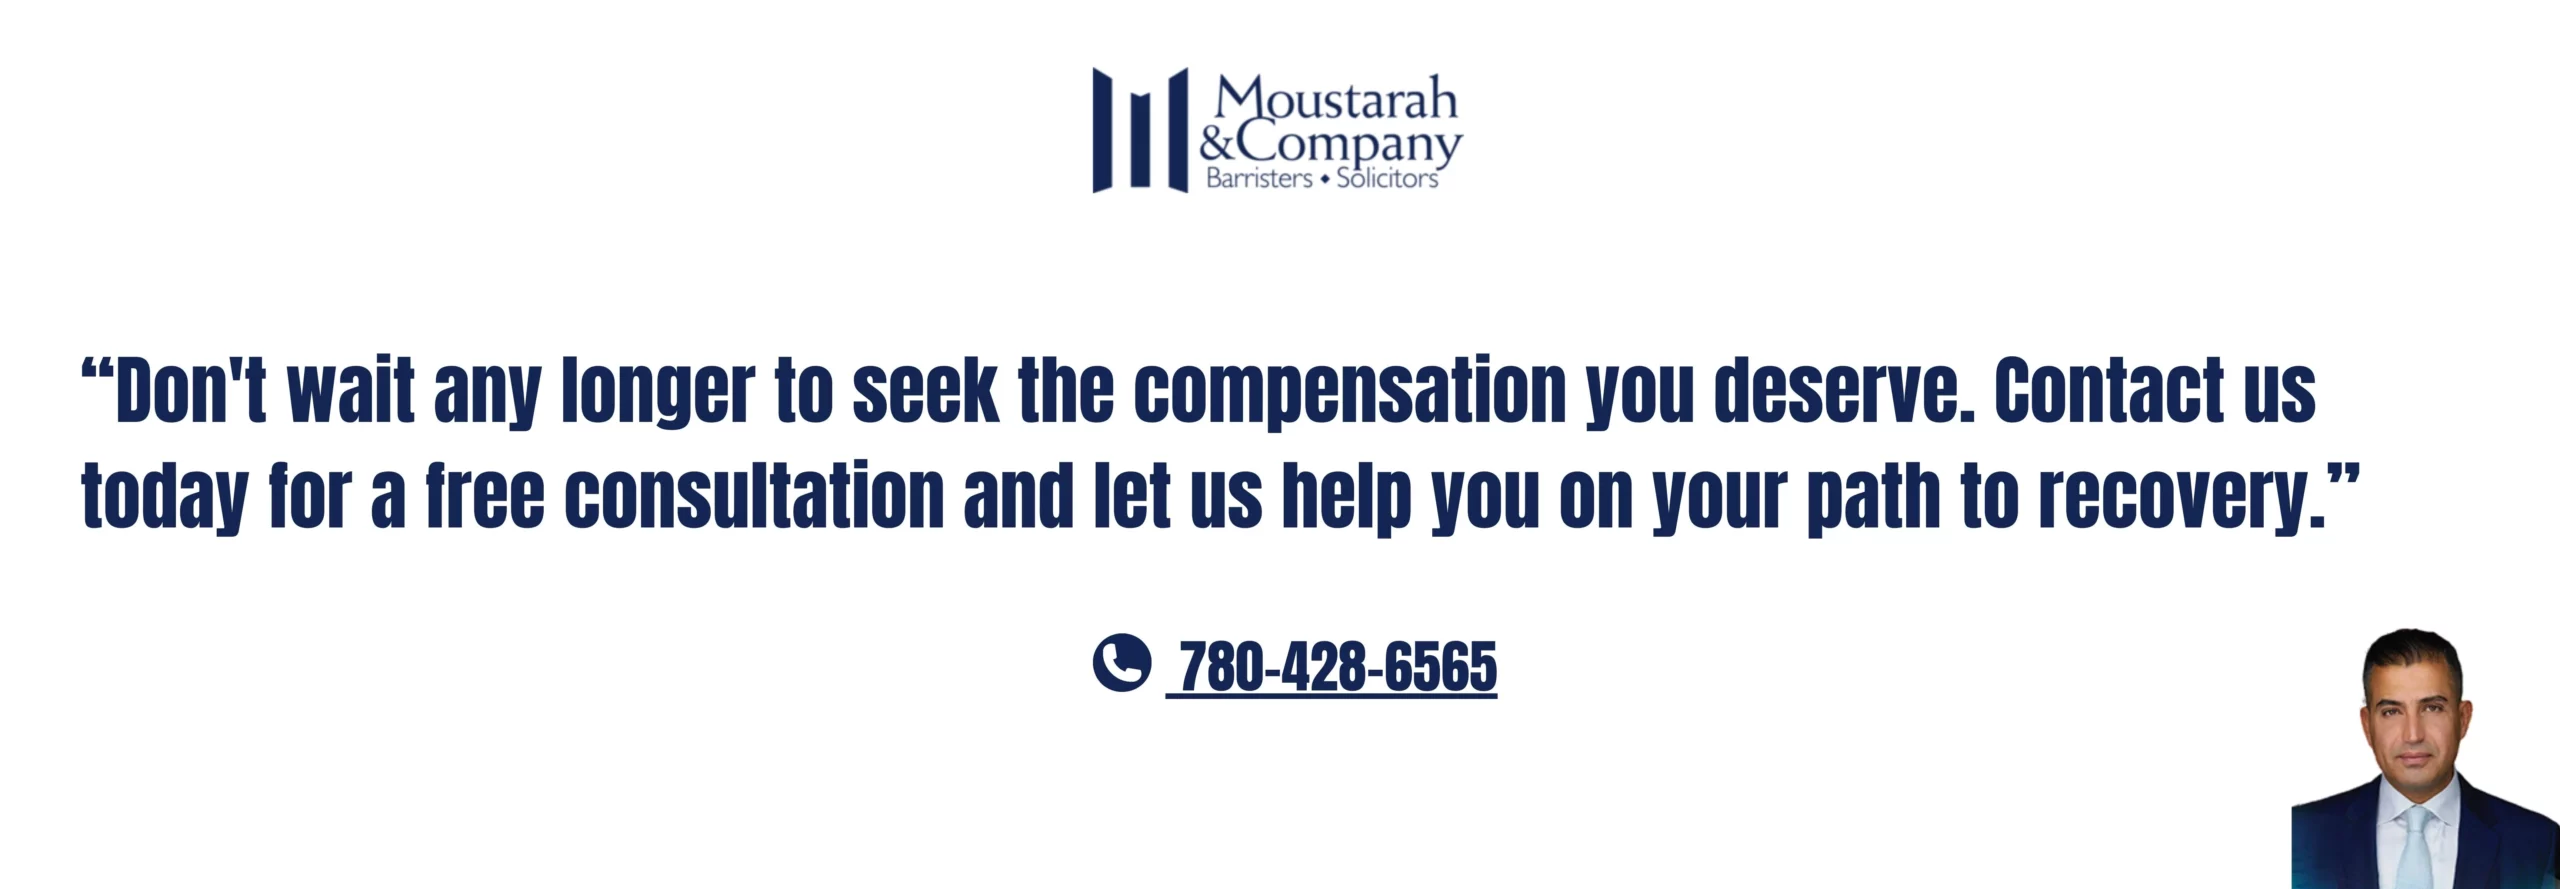 Don't wait any longer to seek the compensation you deserve. Contact us today for a free consultation and let us help you on your path to recovery